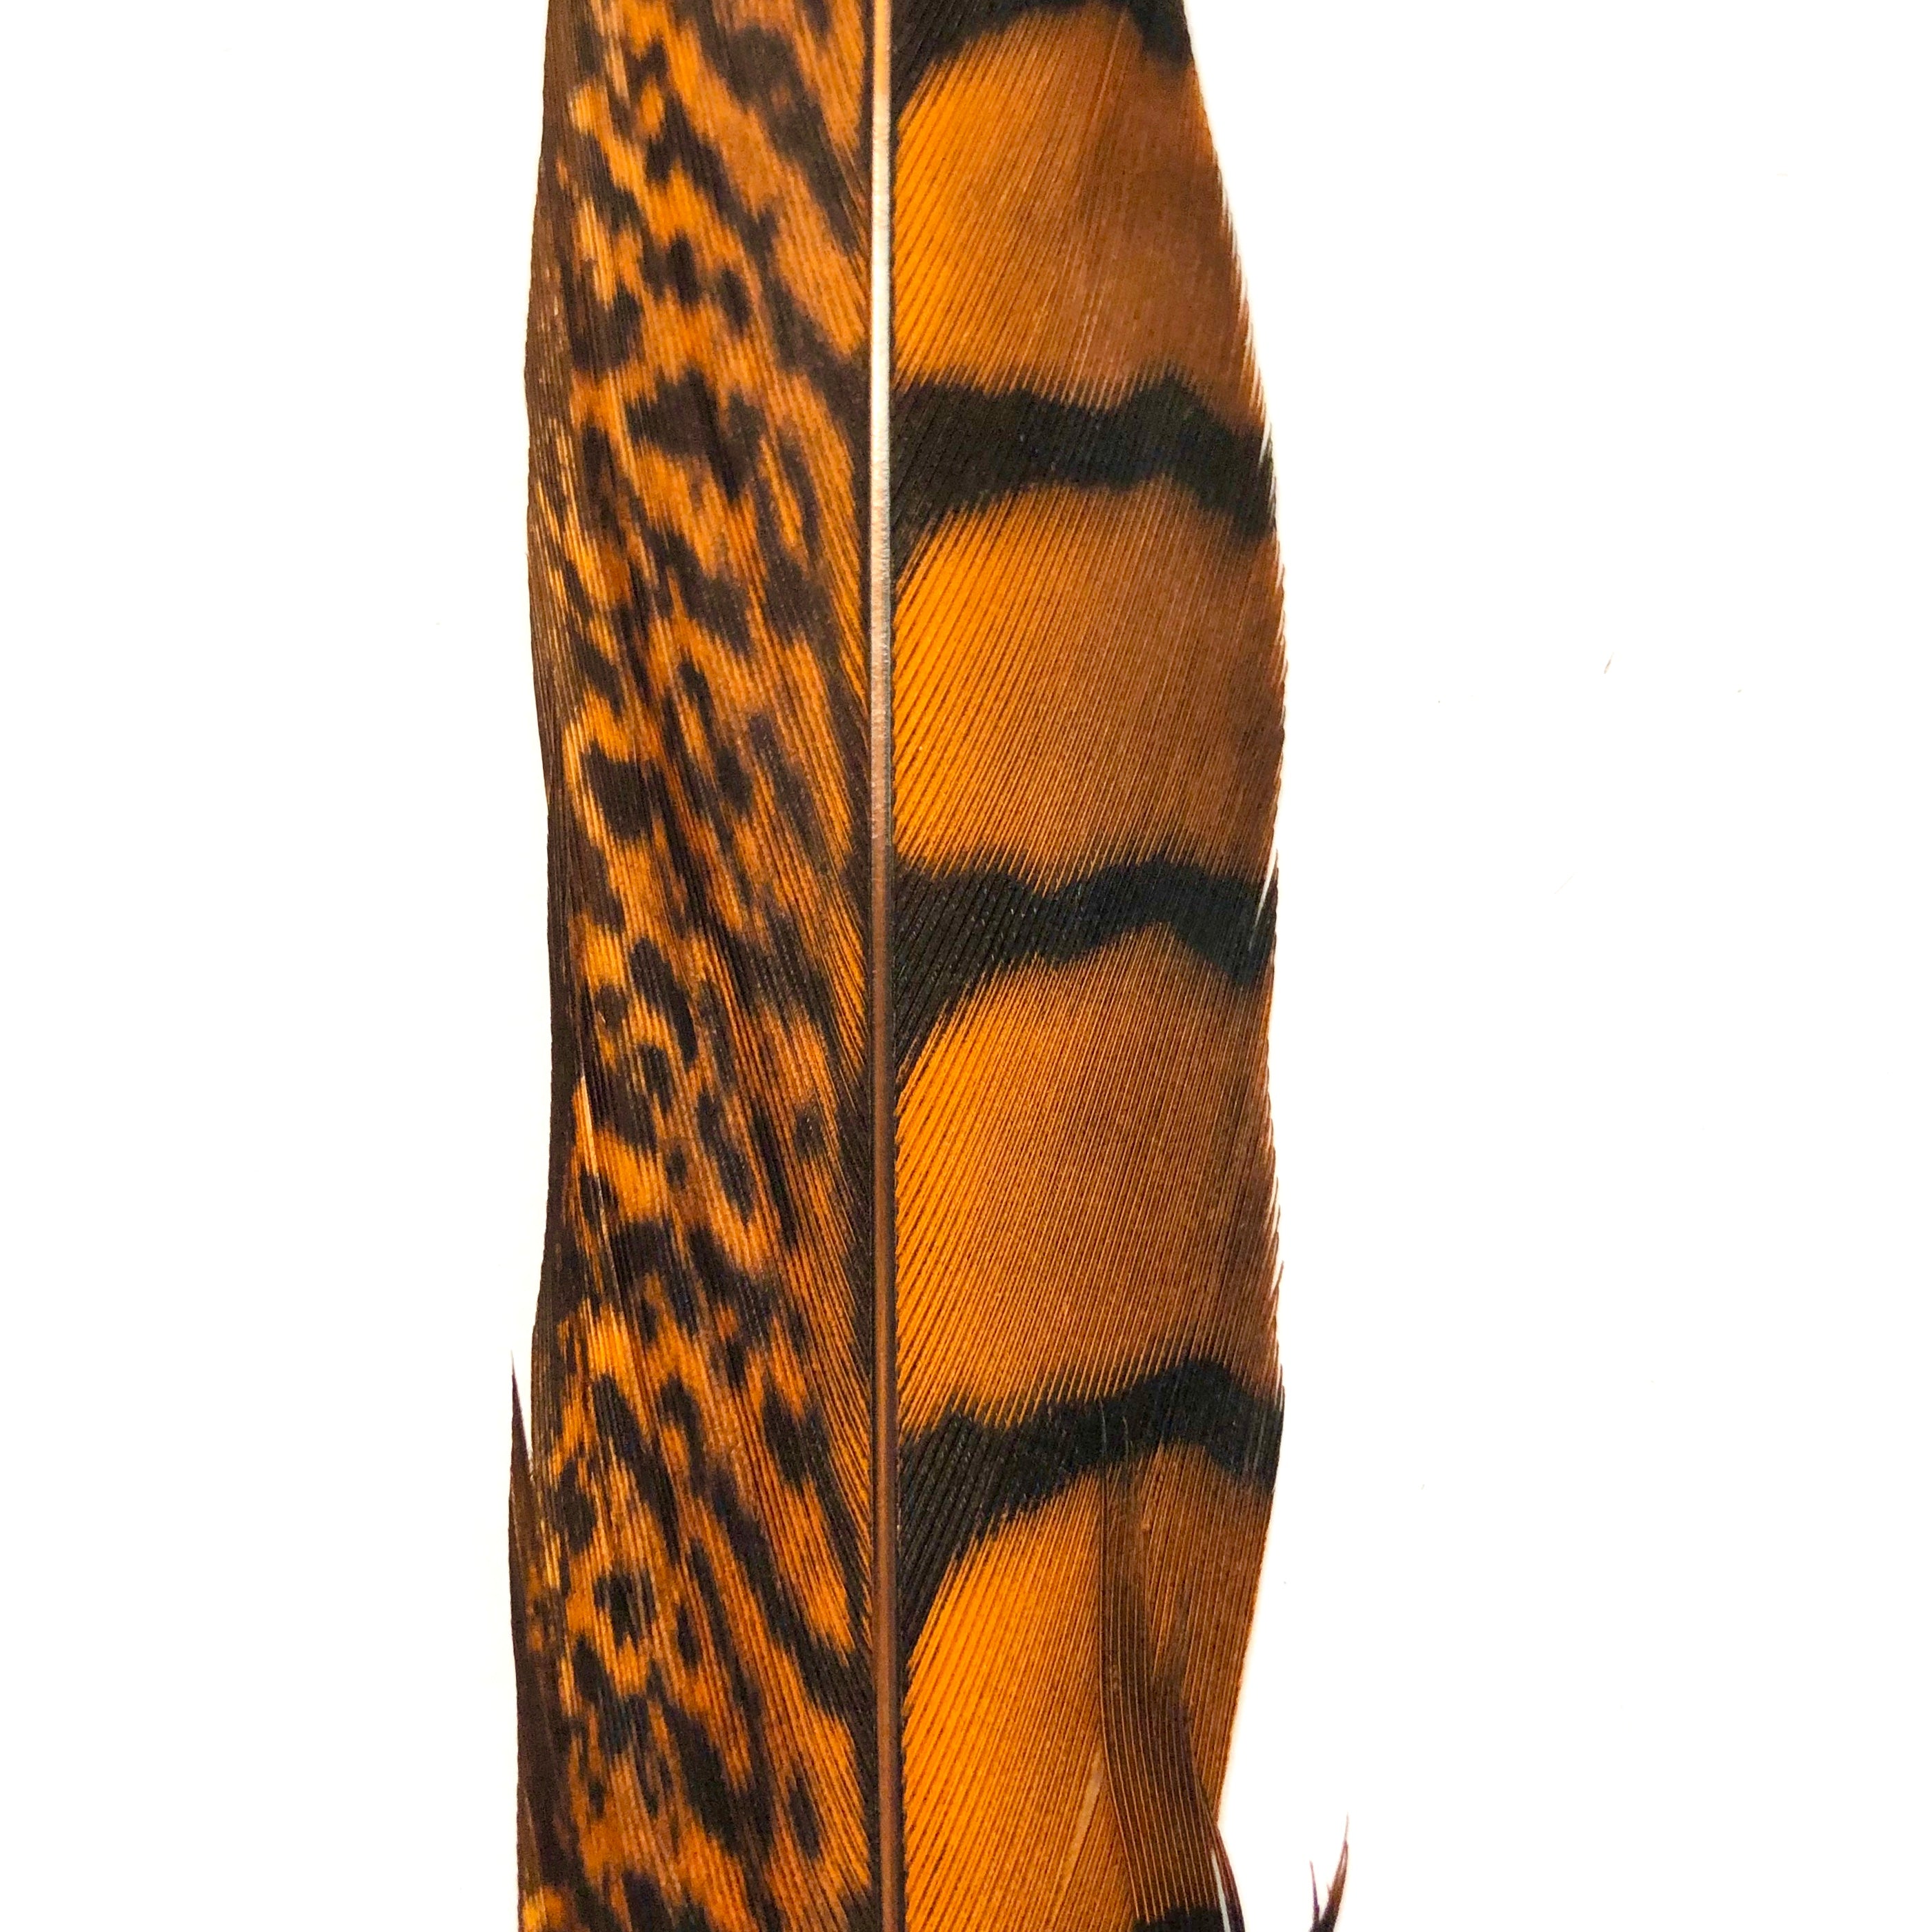 20" to 30" Lady Amherst Pheasant Side Tail Feather - Orange ((SECONDS))